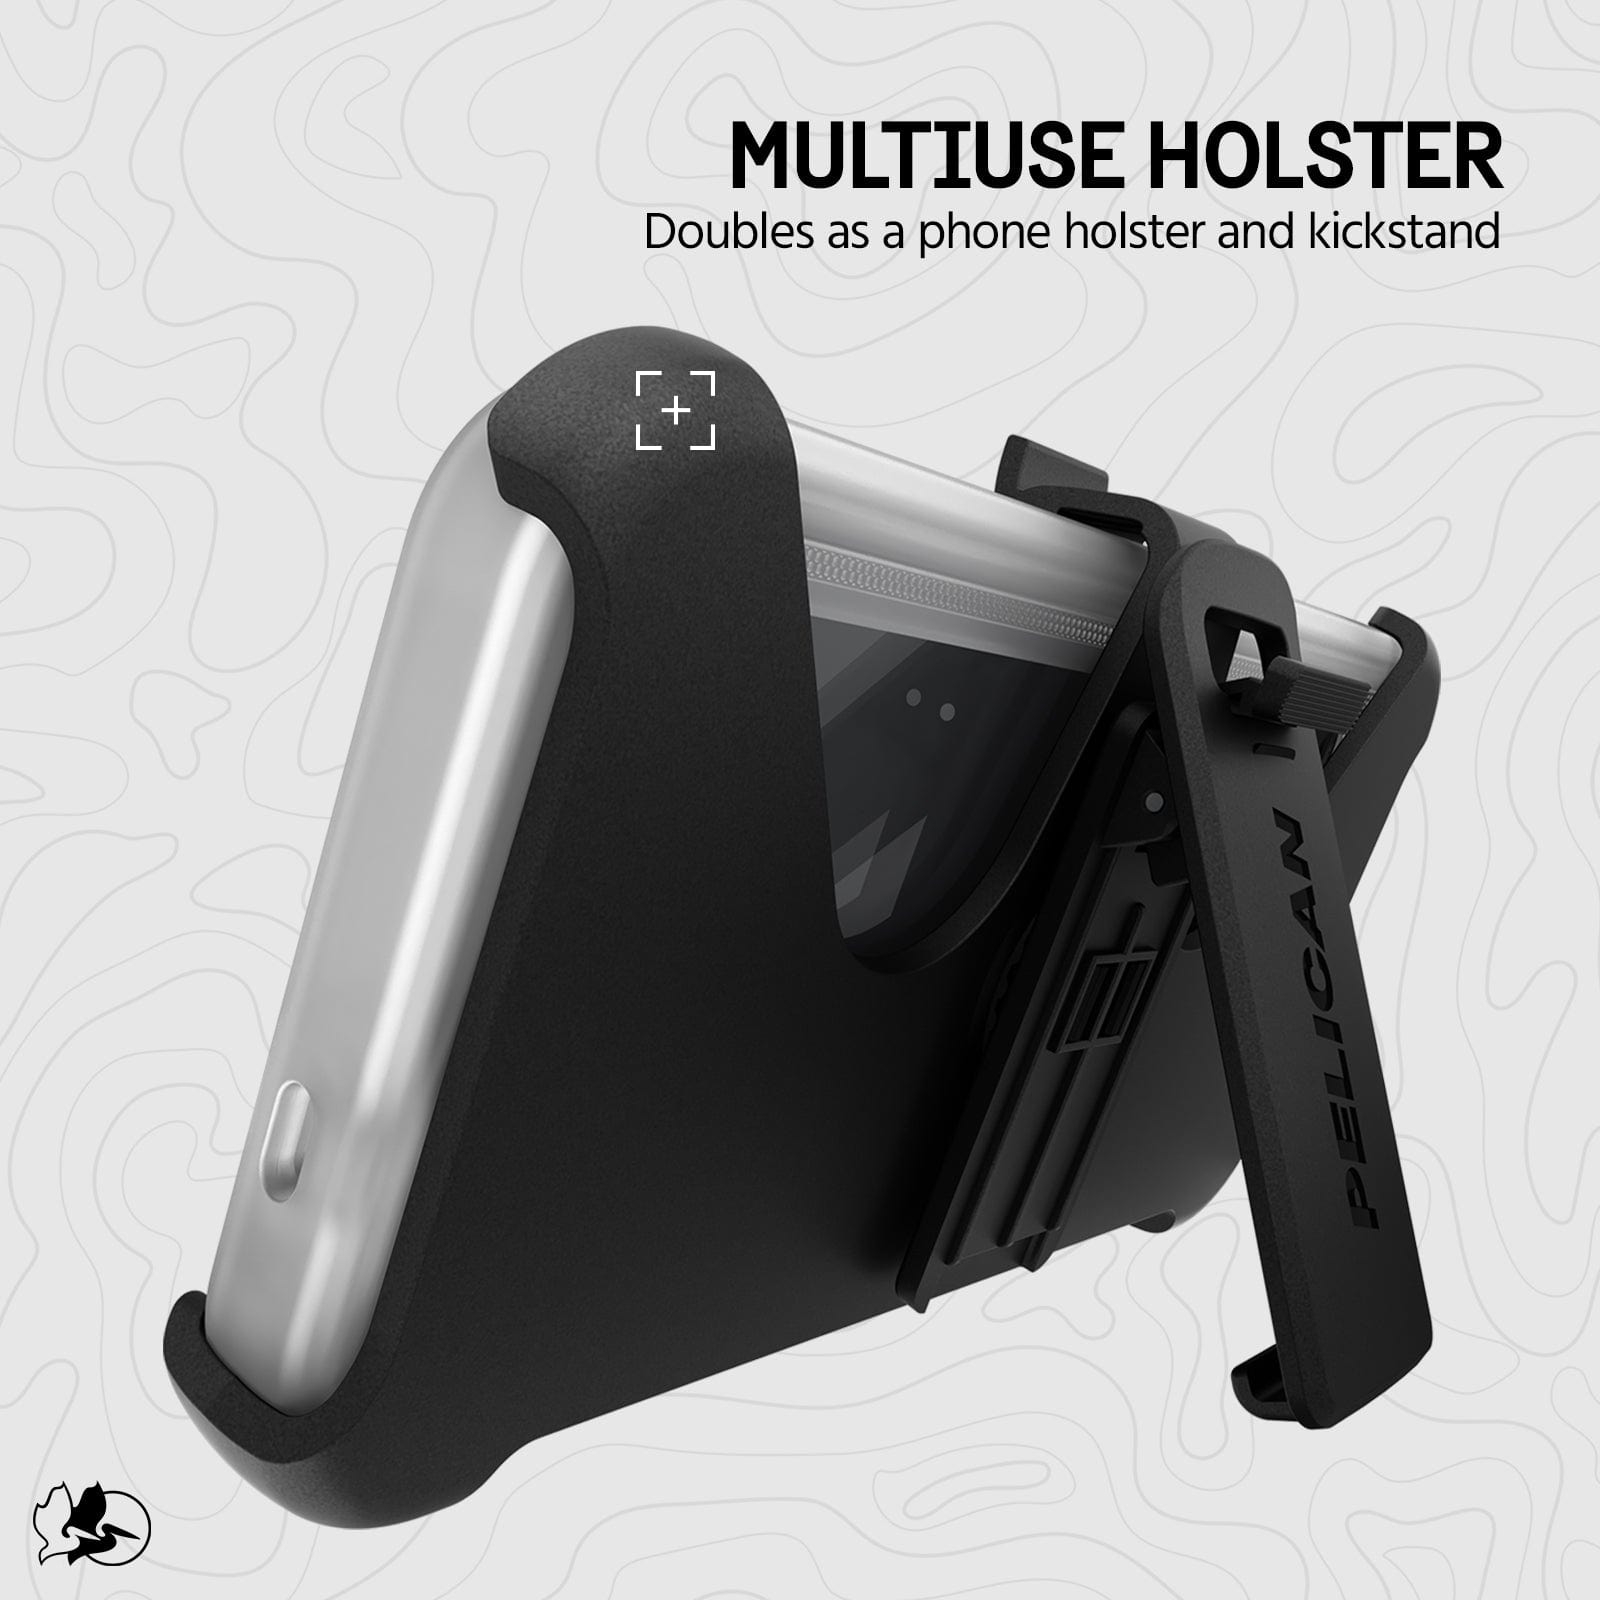 Multiuse holster. Doubles as a phone holster and kickstand